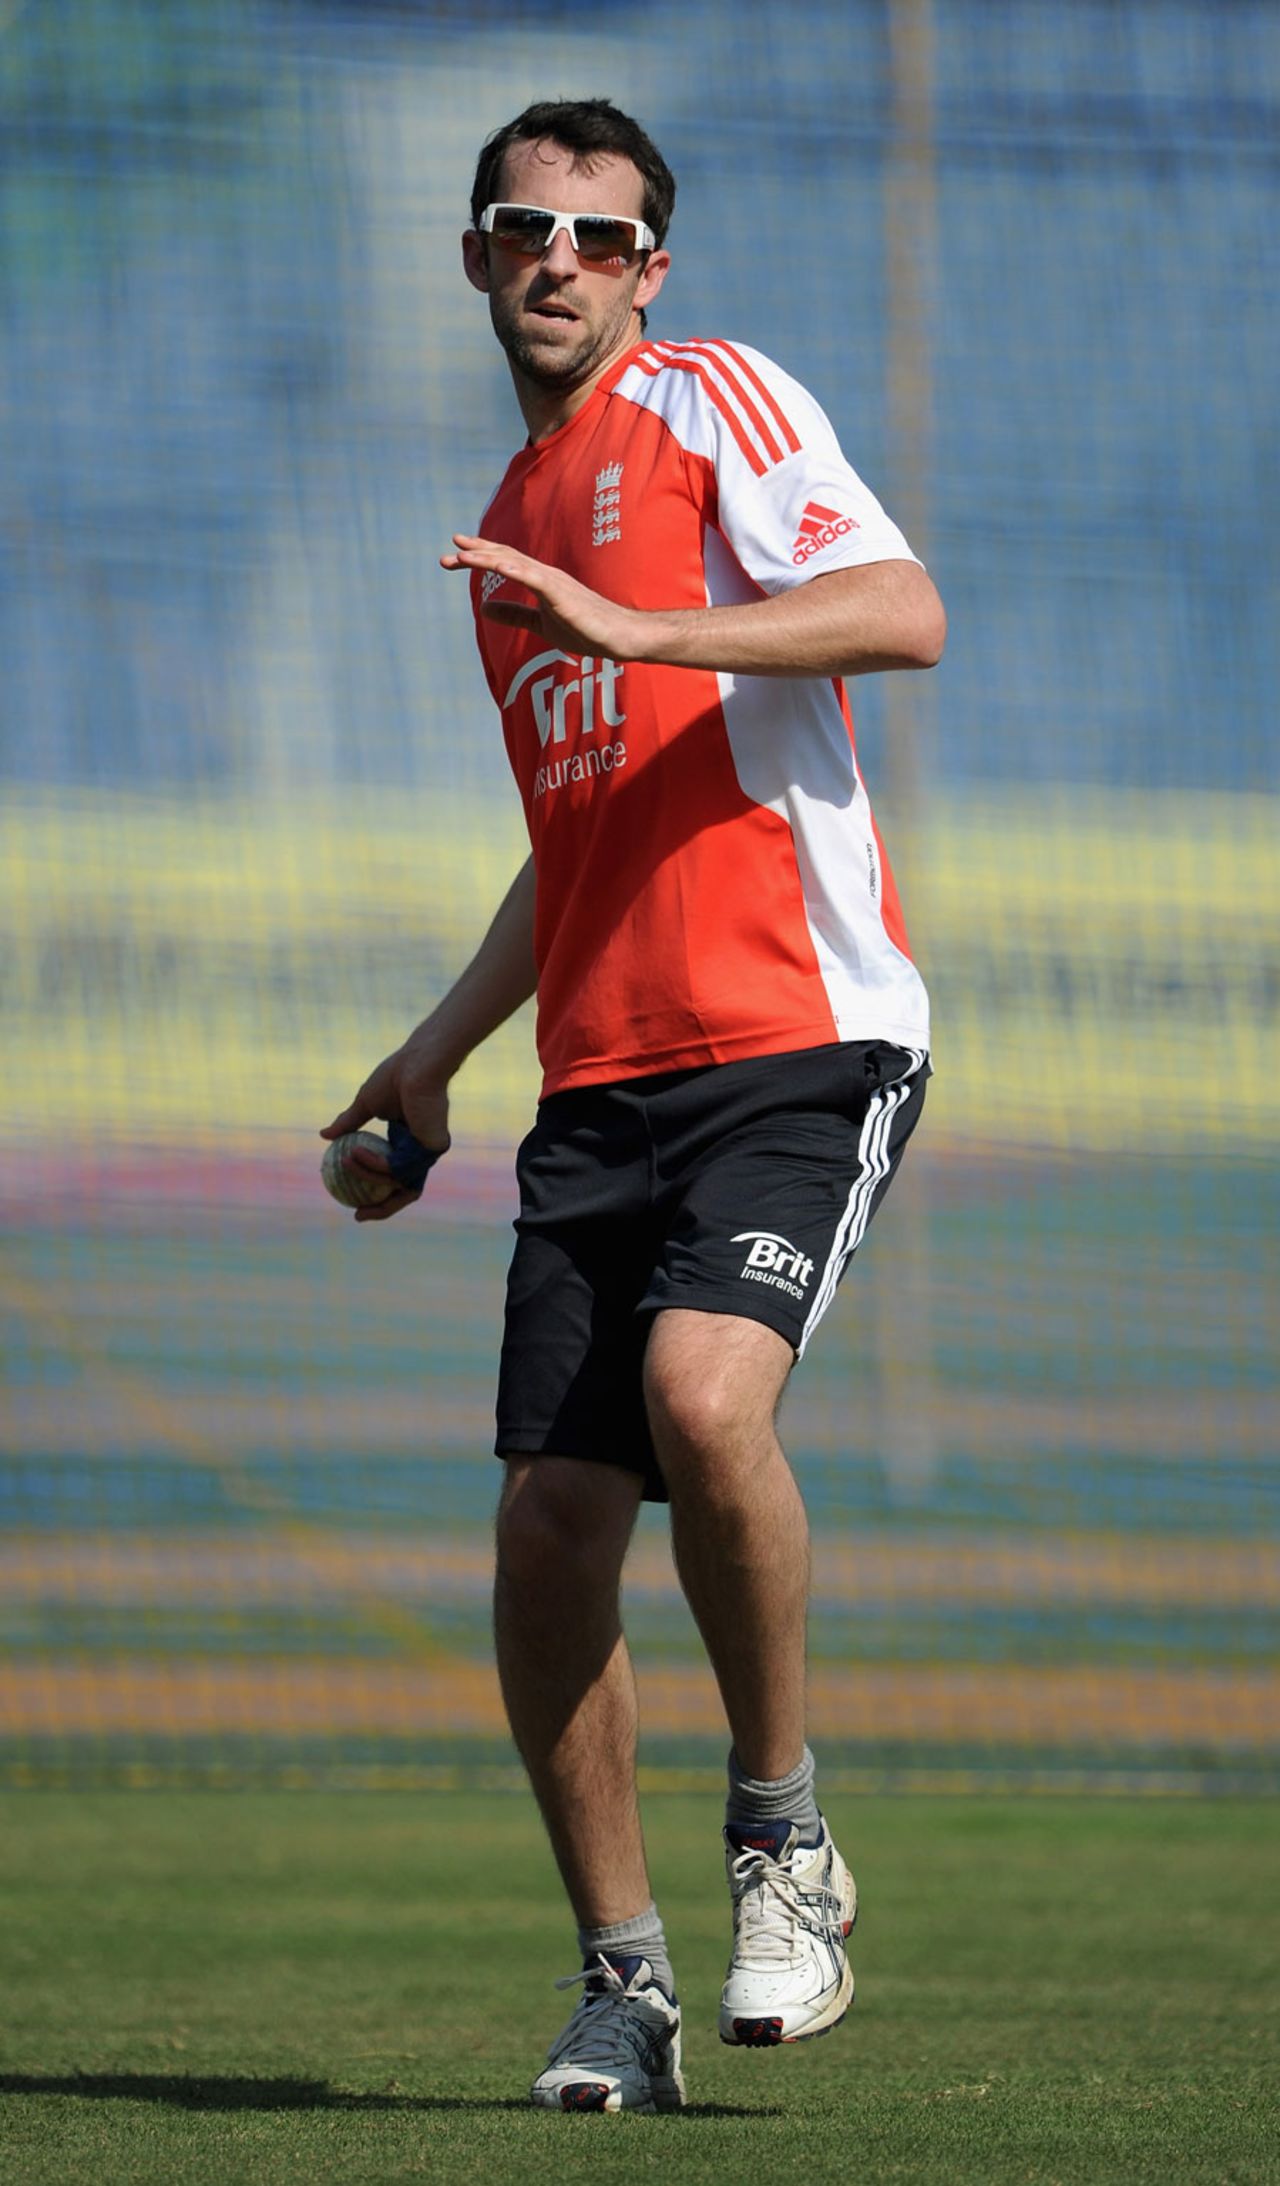 Graham Onions participates in a fielding drill, Wankhede Stadium, Mumbai, October 22, 2011